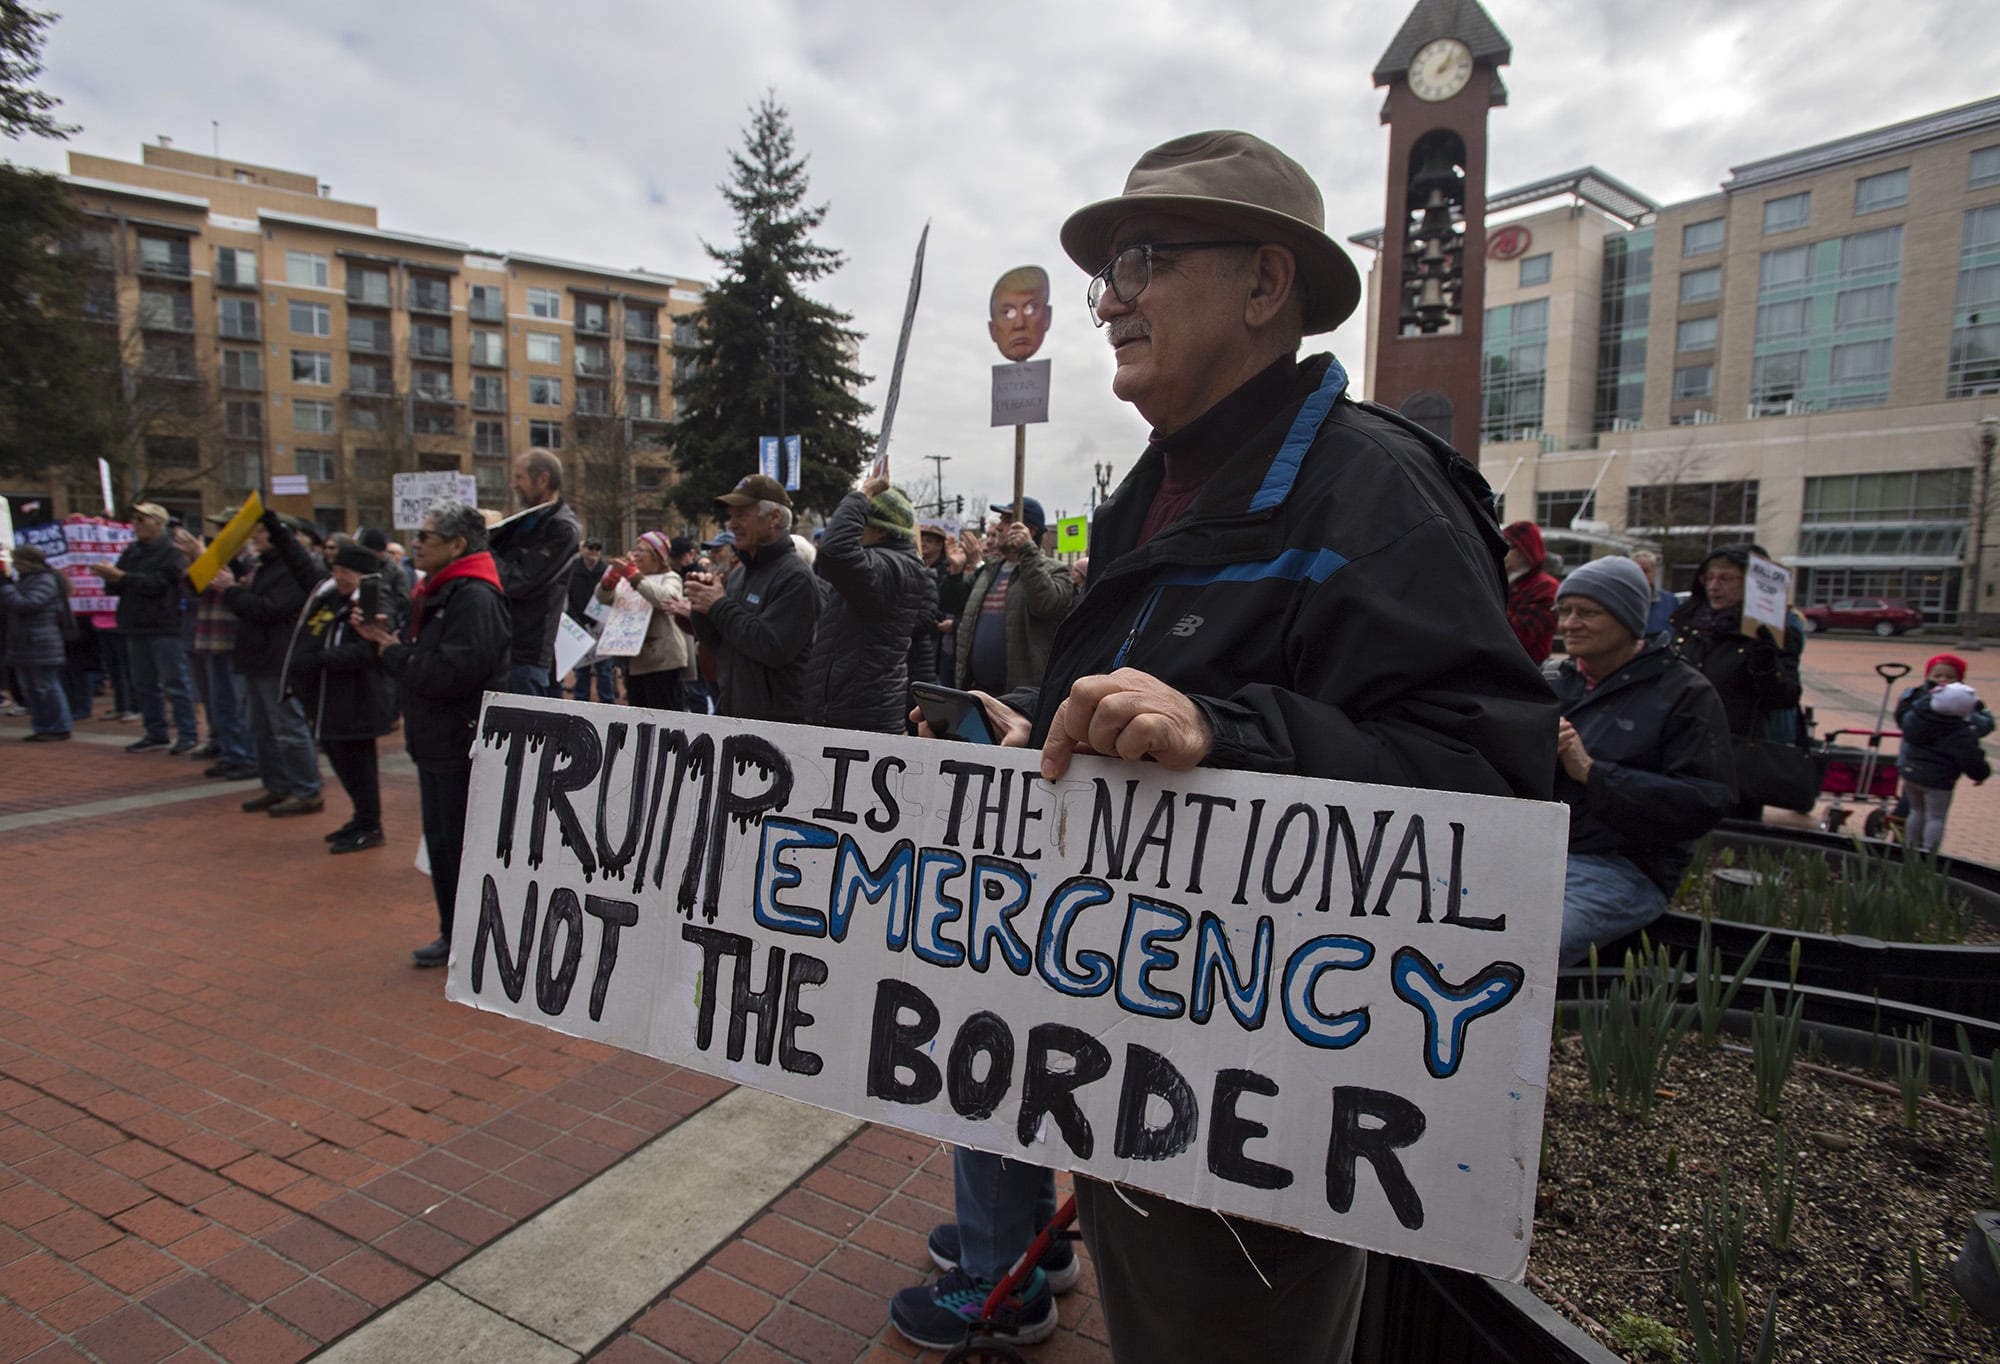 Gallery: Emergency Declaration Protest photo gallery